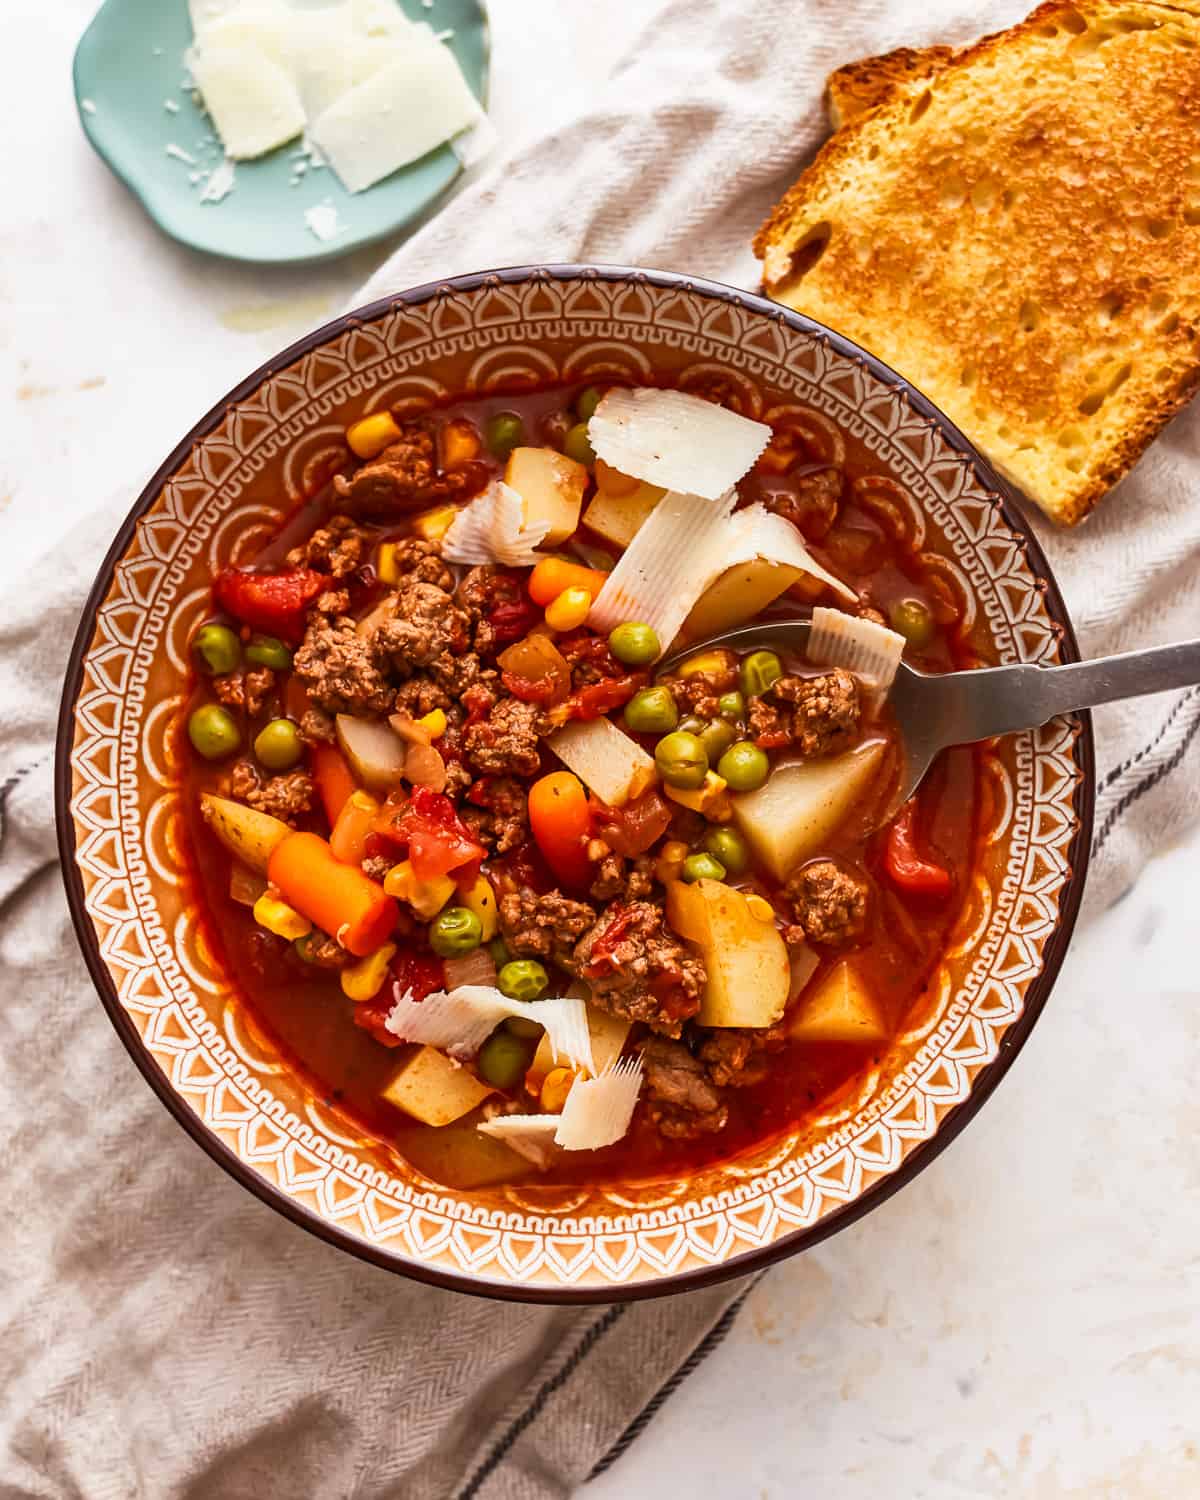 A bowl of soup with meat, vegetables and bread.